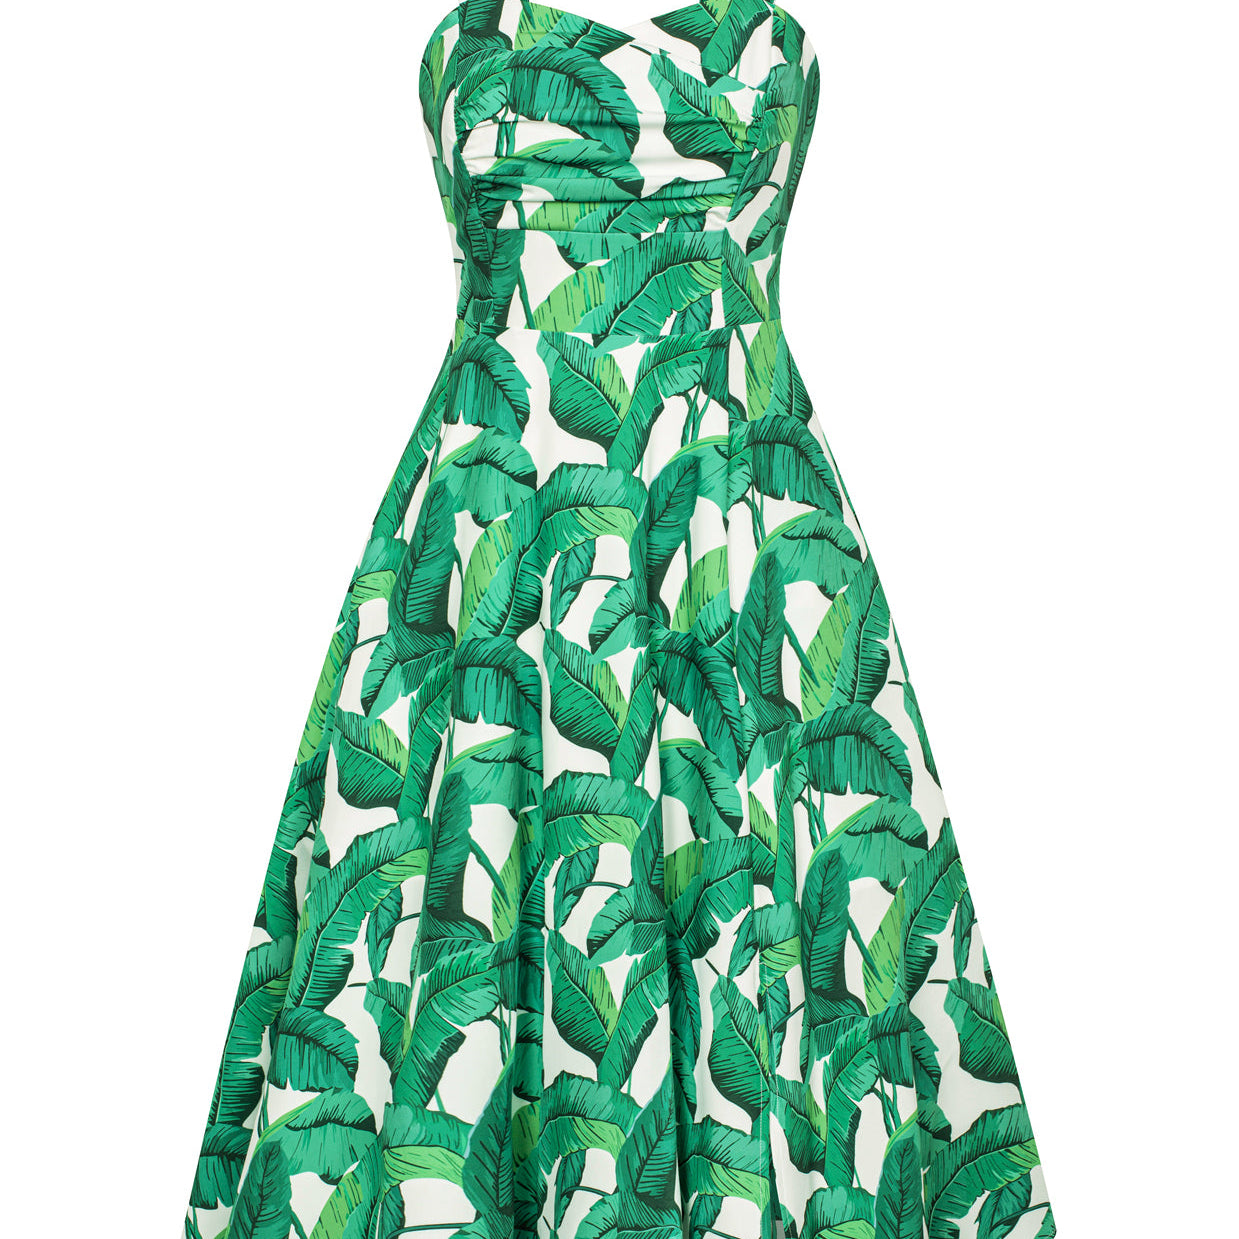 Vintage Floral Patterns Cocktail Dress Sleeveless Spaghetti Strap Ruched Slit A Line Swing Dress with Pockets